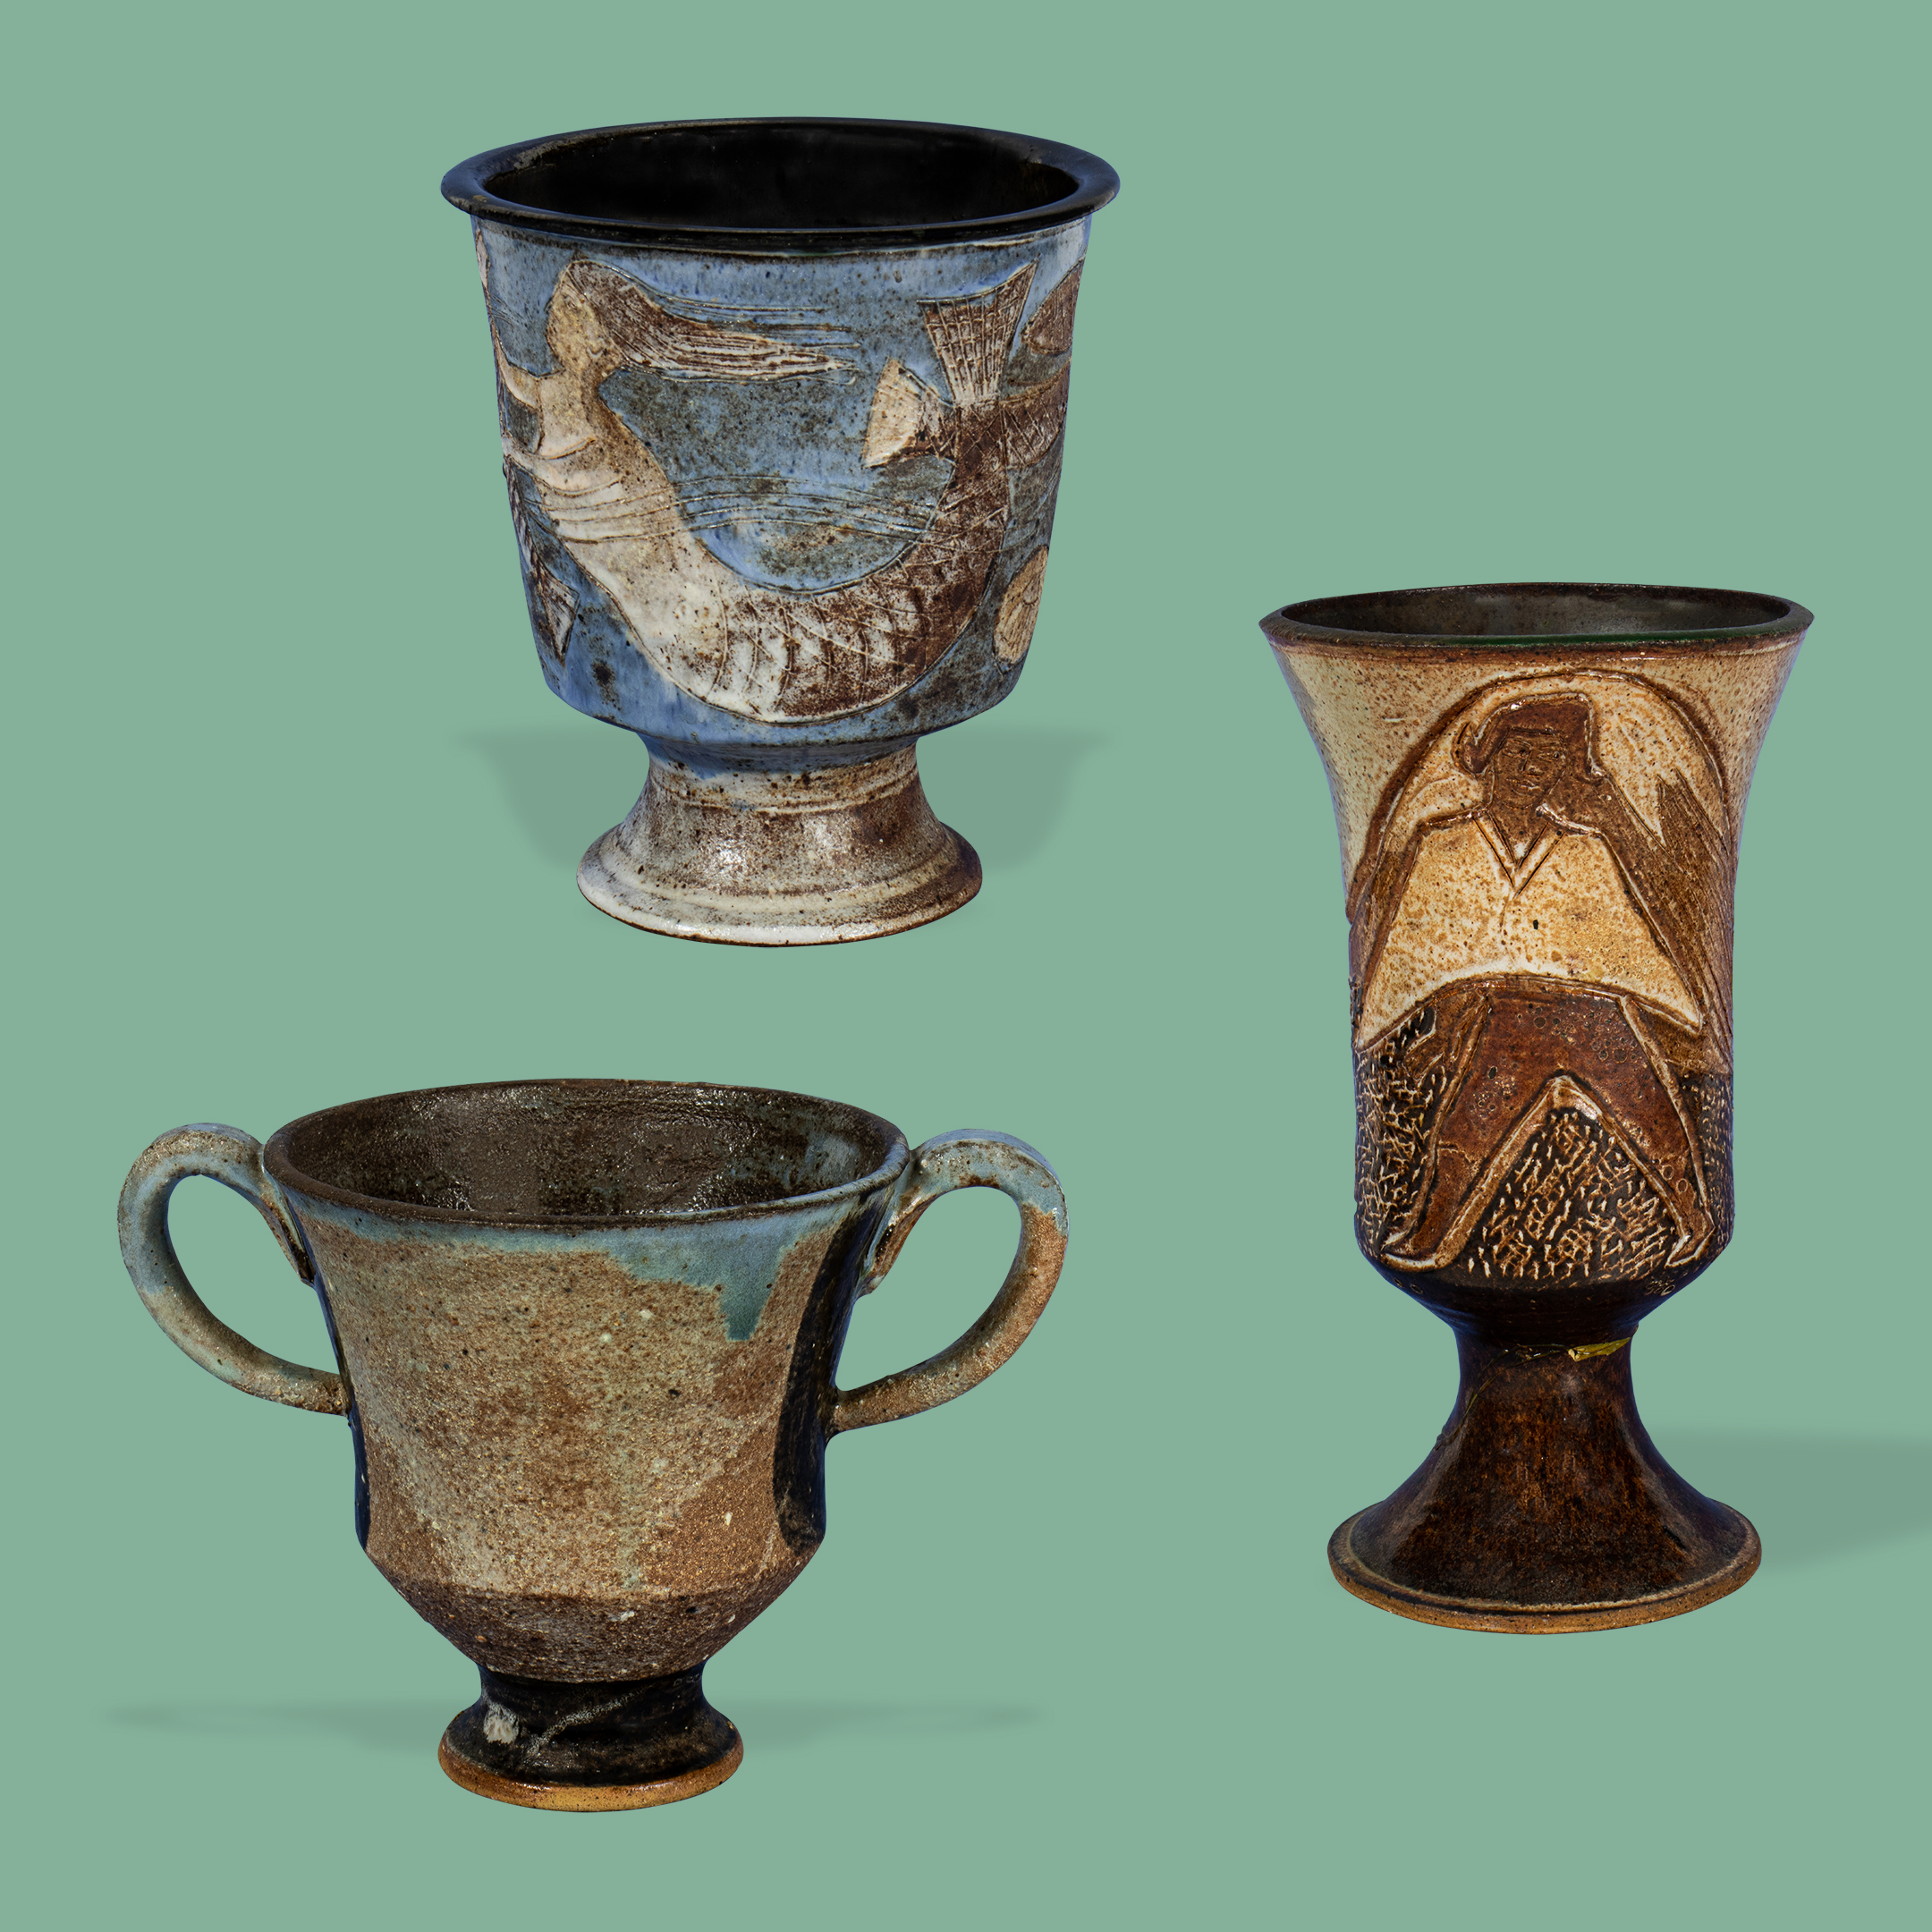 From left to right: A Marguerite Wildenhain chalice. A Marguerite Wildenhain Pond Farm Mermaid vase. A Marguerite Wildenhain Pond Farm Footed vase.